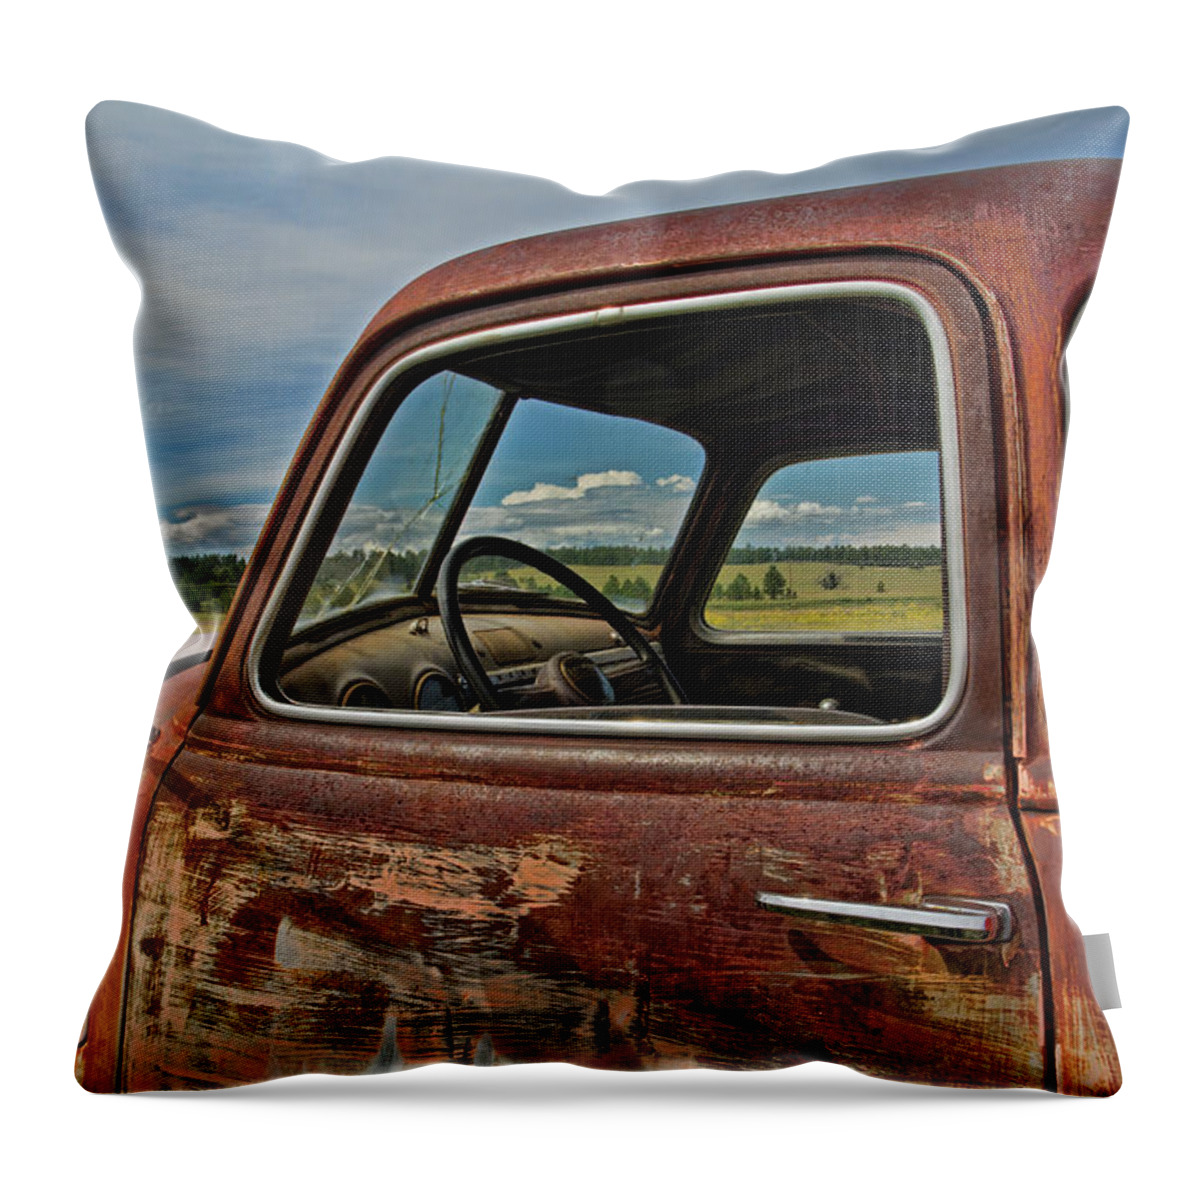 Truck Throw Pillow featuring the photograph Chevy Tanker Cab by Alana Thrower